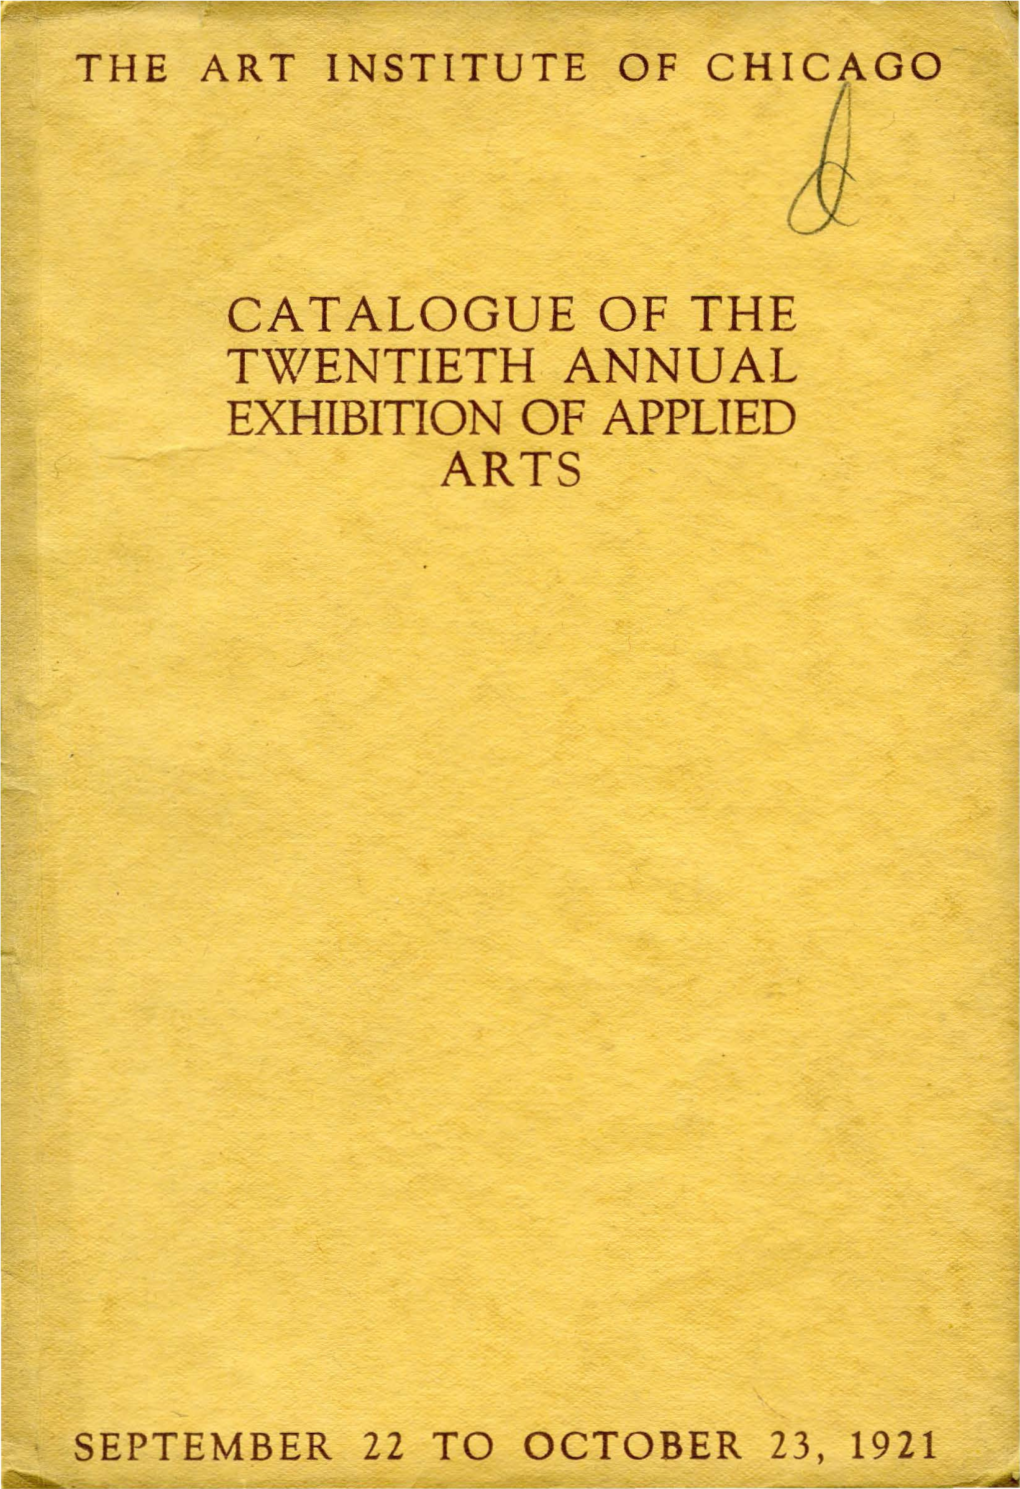 Catalogue O) the T:Entieth Annual Exhibition of Applied